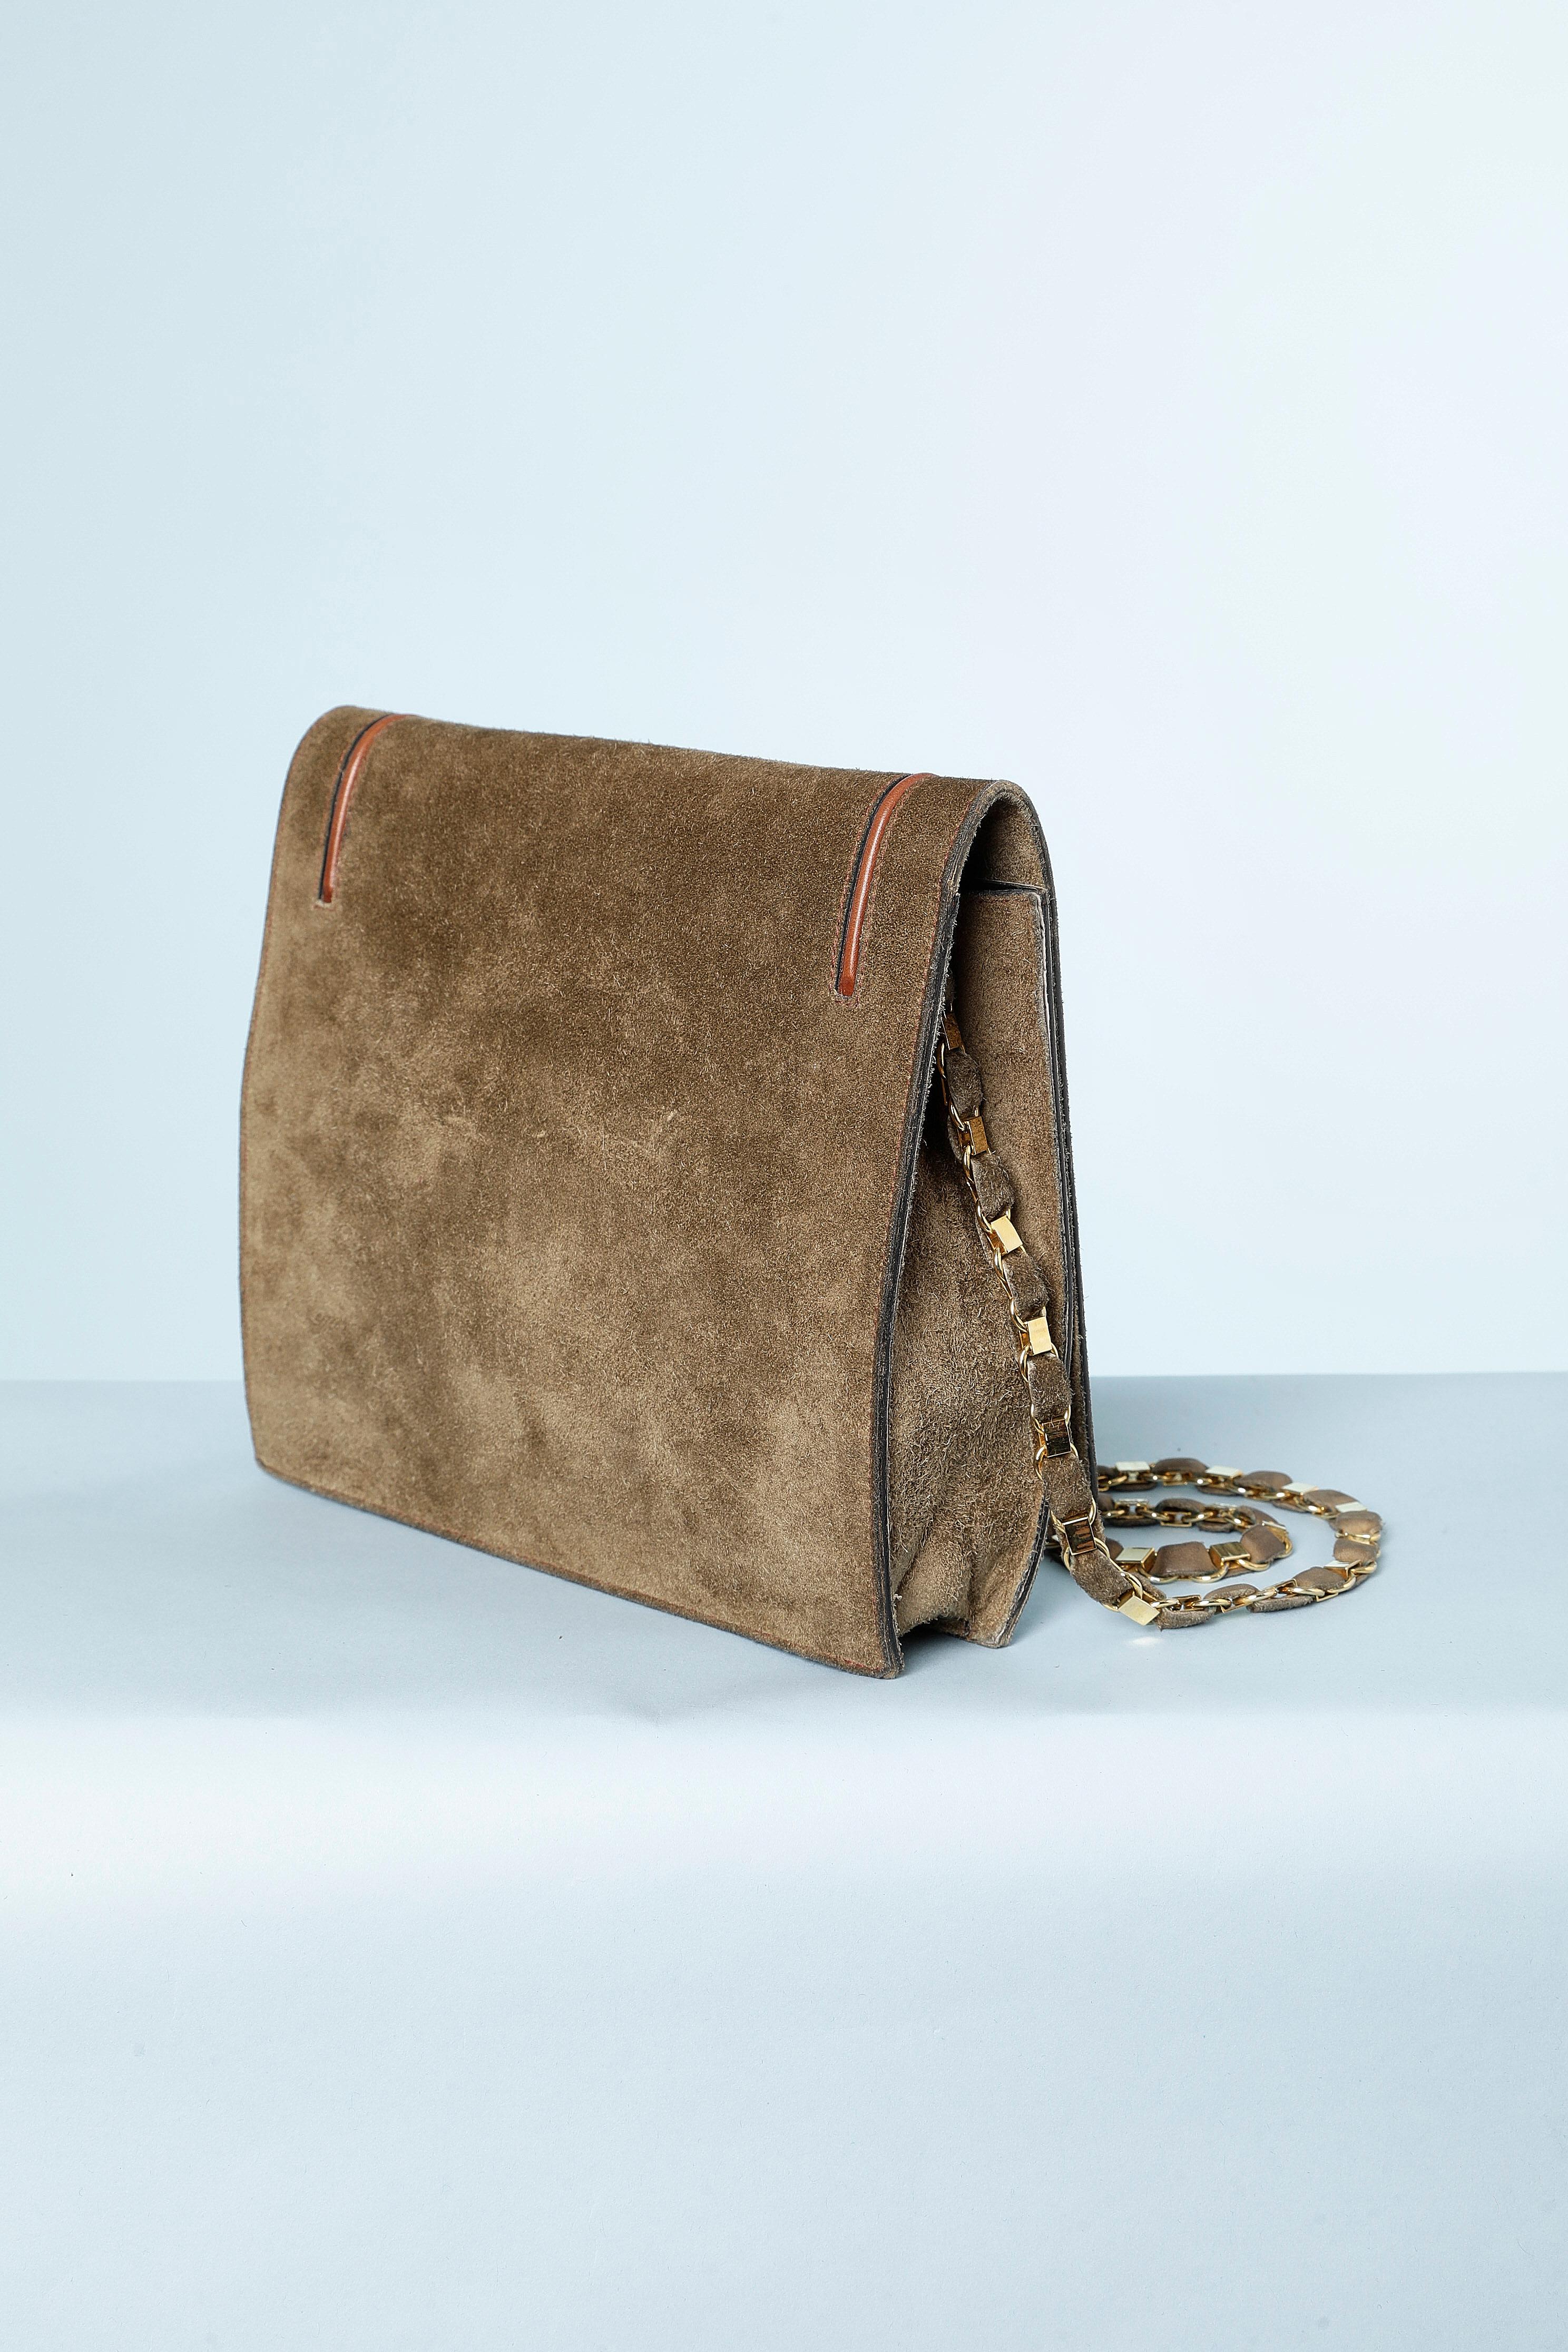 Brown suede bag with leather details and metallic chain and suede.
Black leather lining.
SIZE: 20 cm X 3 cm X 21 cm 